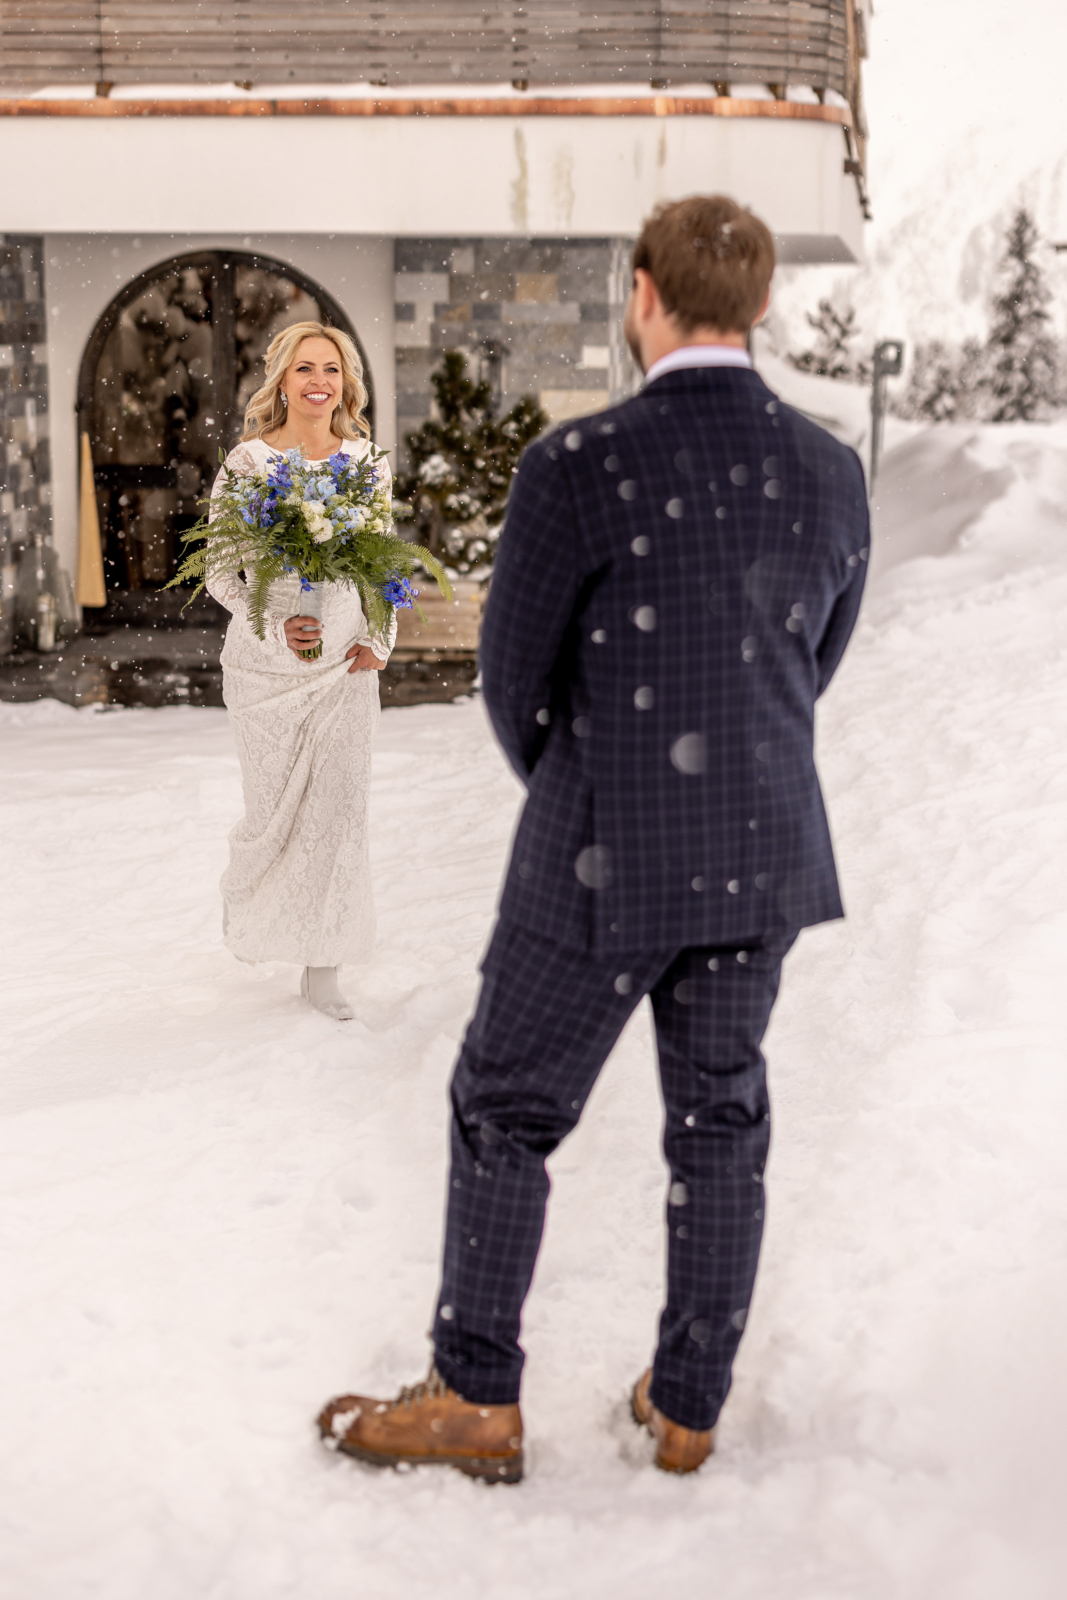 First Look at the winter wedding in Lech am Arlberg